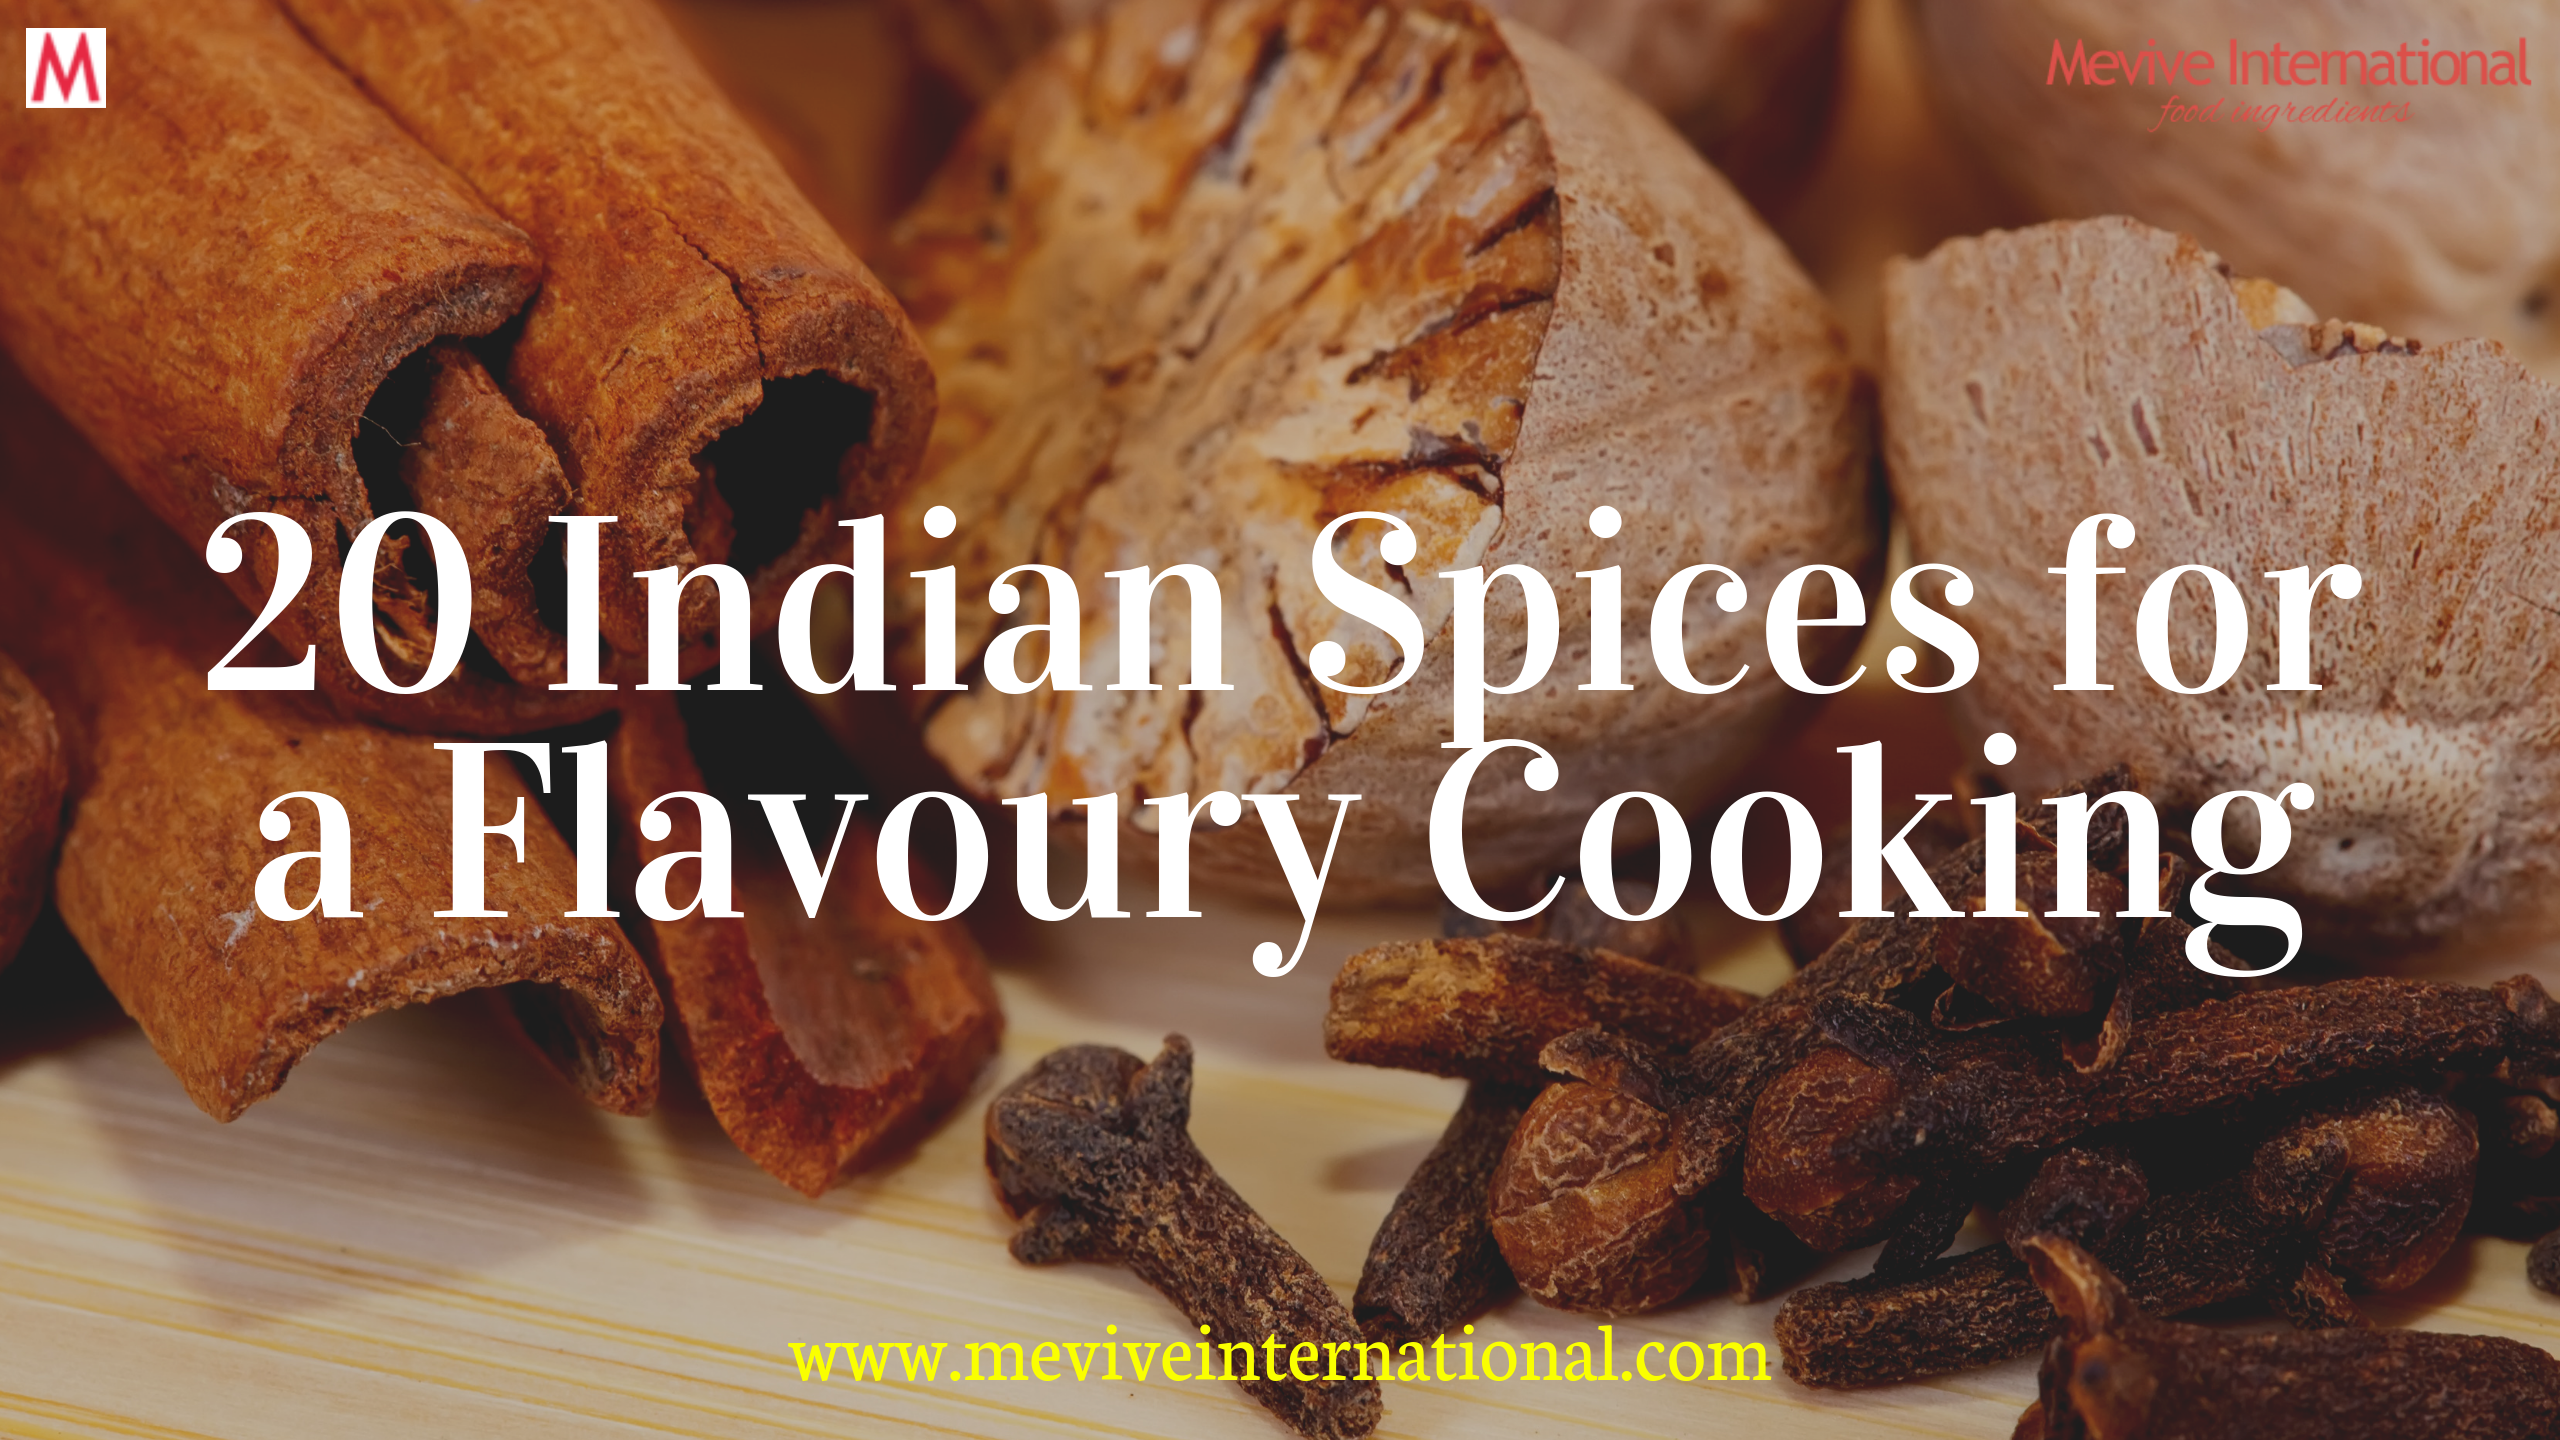 List of 20 Indian Spices for a Flavoury Cooking